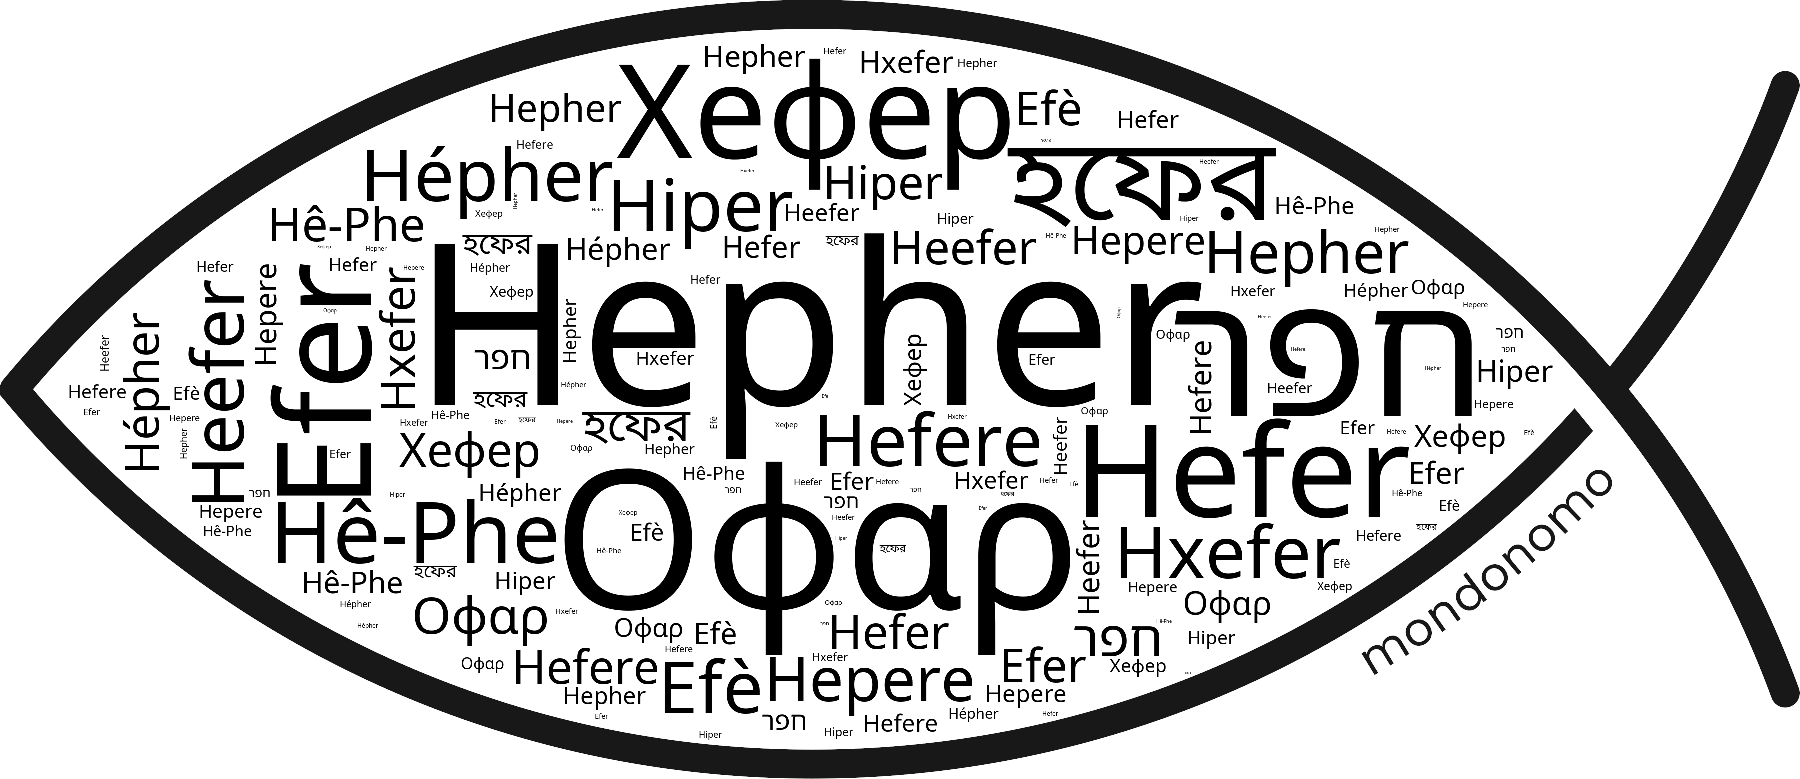 Name Hepher in the world's Bibles